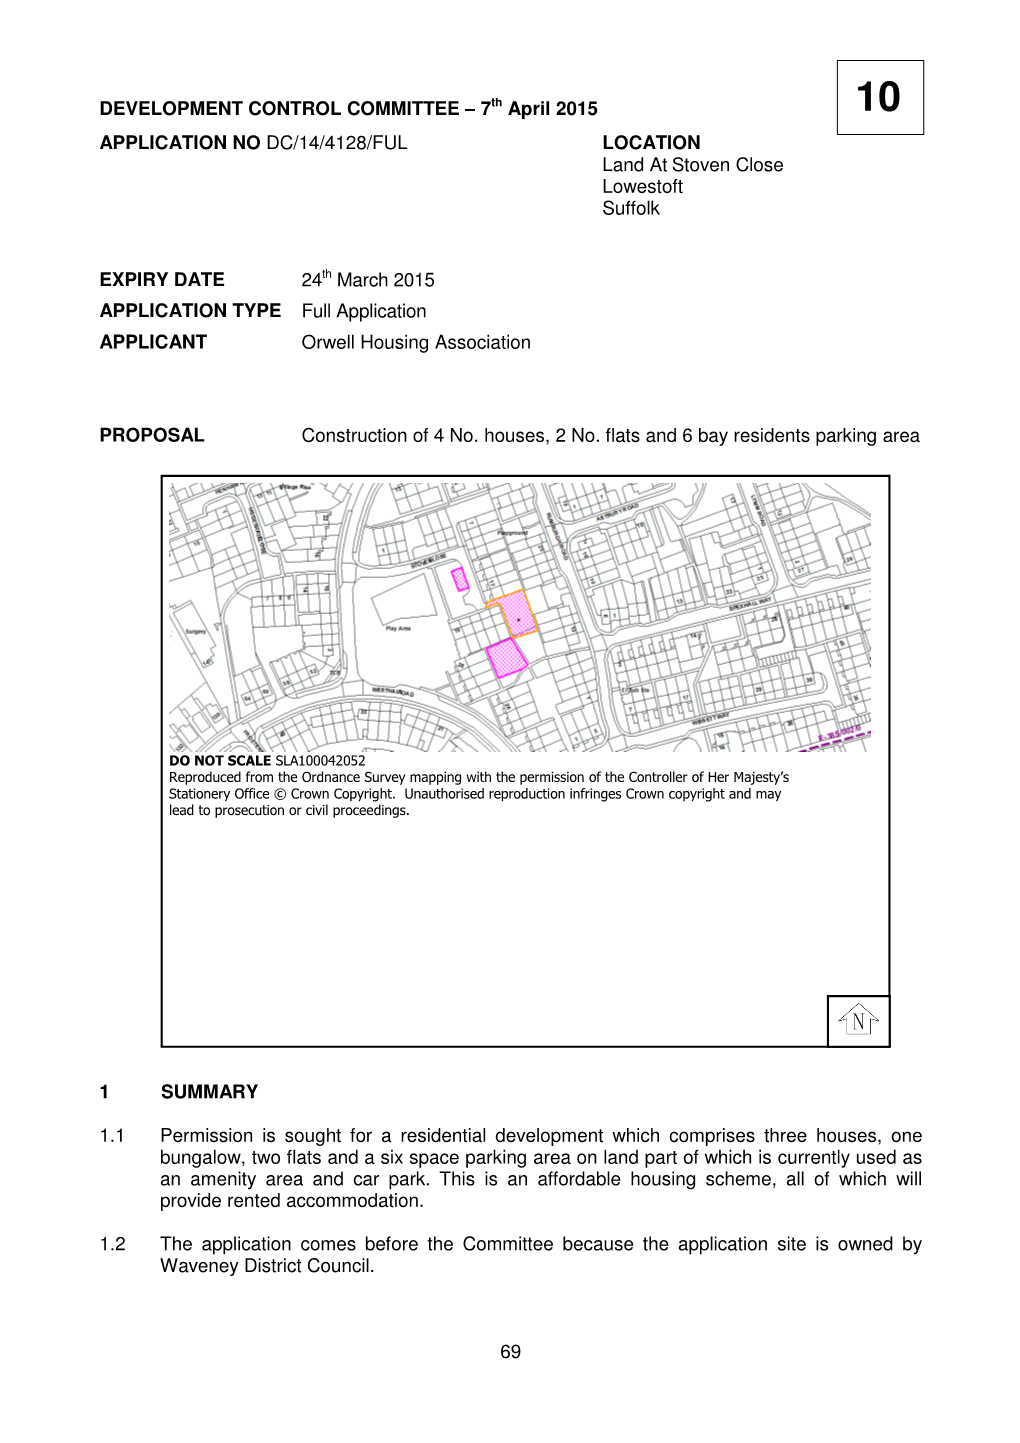 69 1 SUMMARY 1.1 Permission Is Sought for a Residential